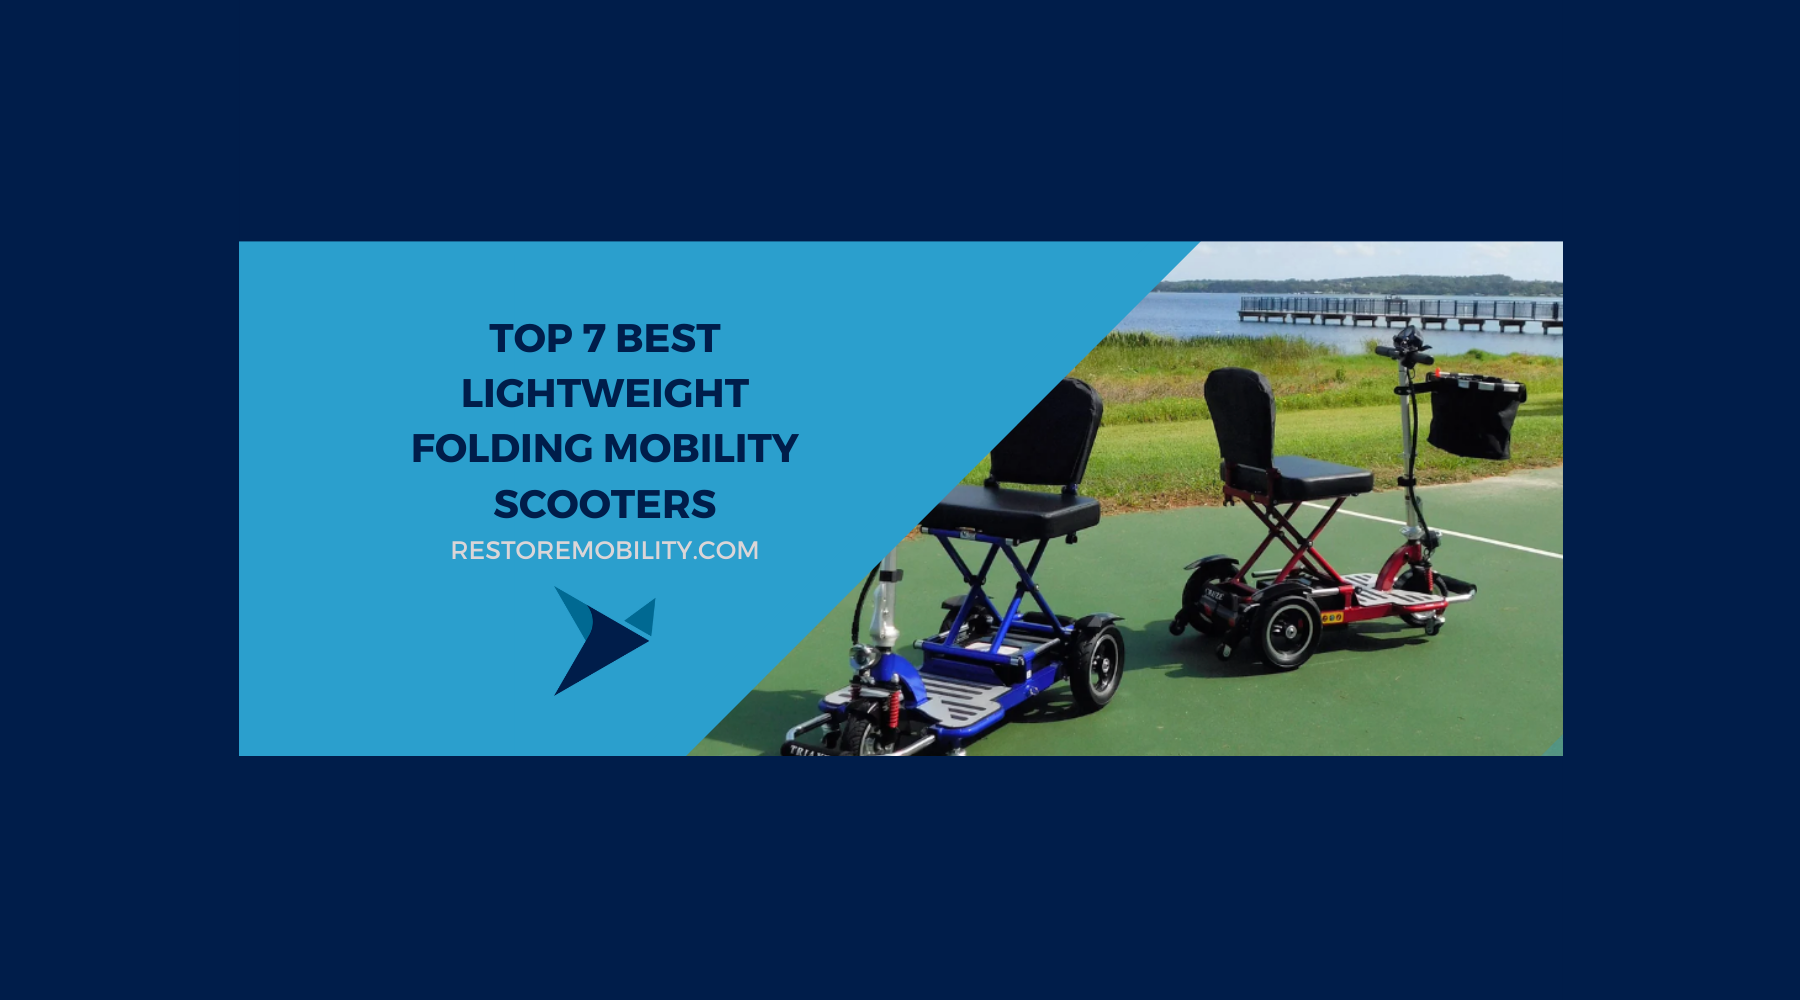 The Top 7 Best Lightweight Folding Mobility Scooters in 2023